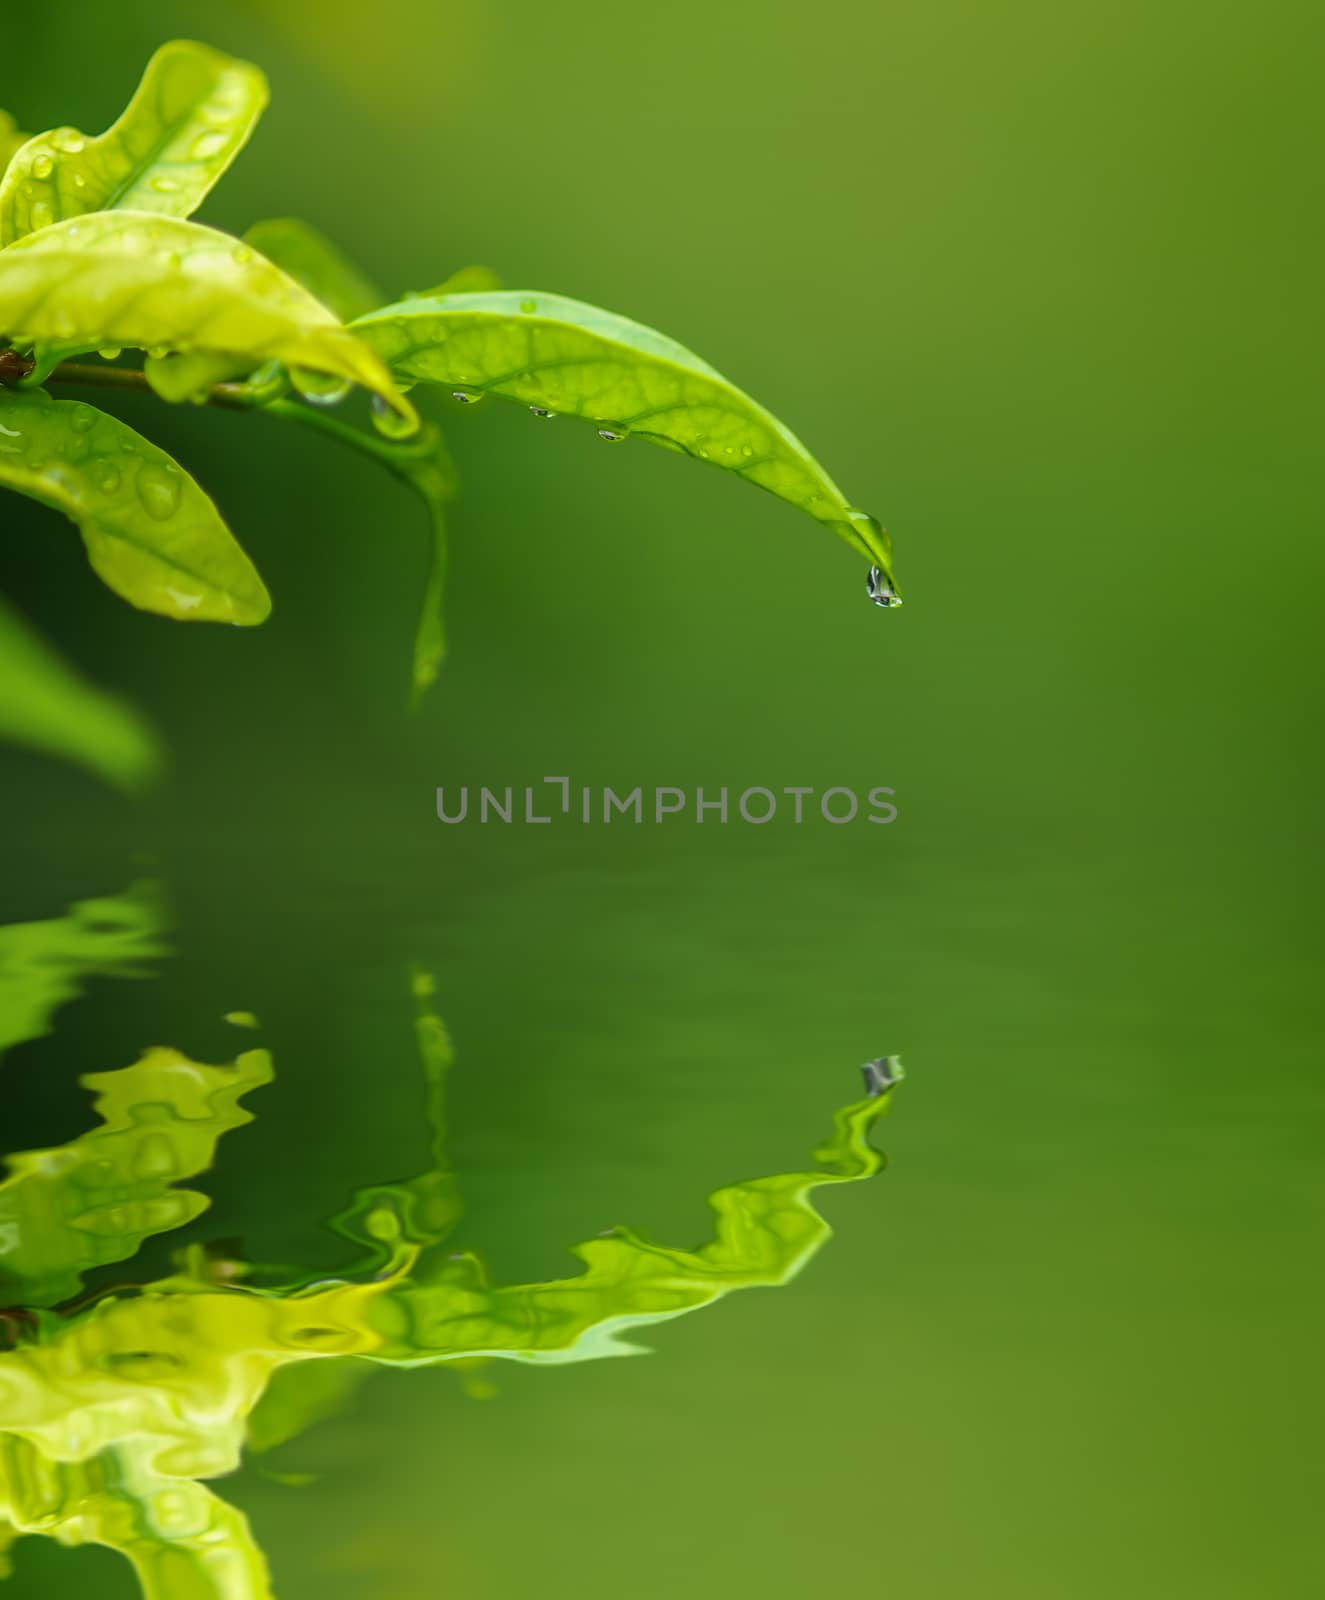 Water drop from green leaf on blur green background